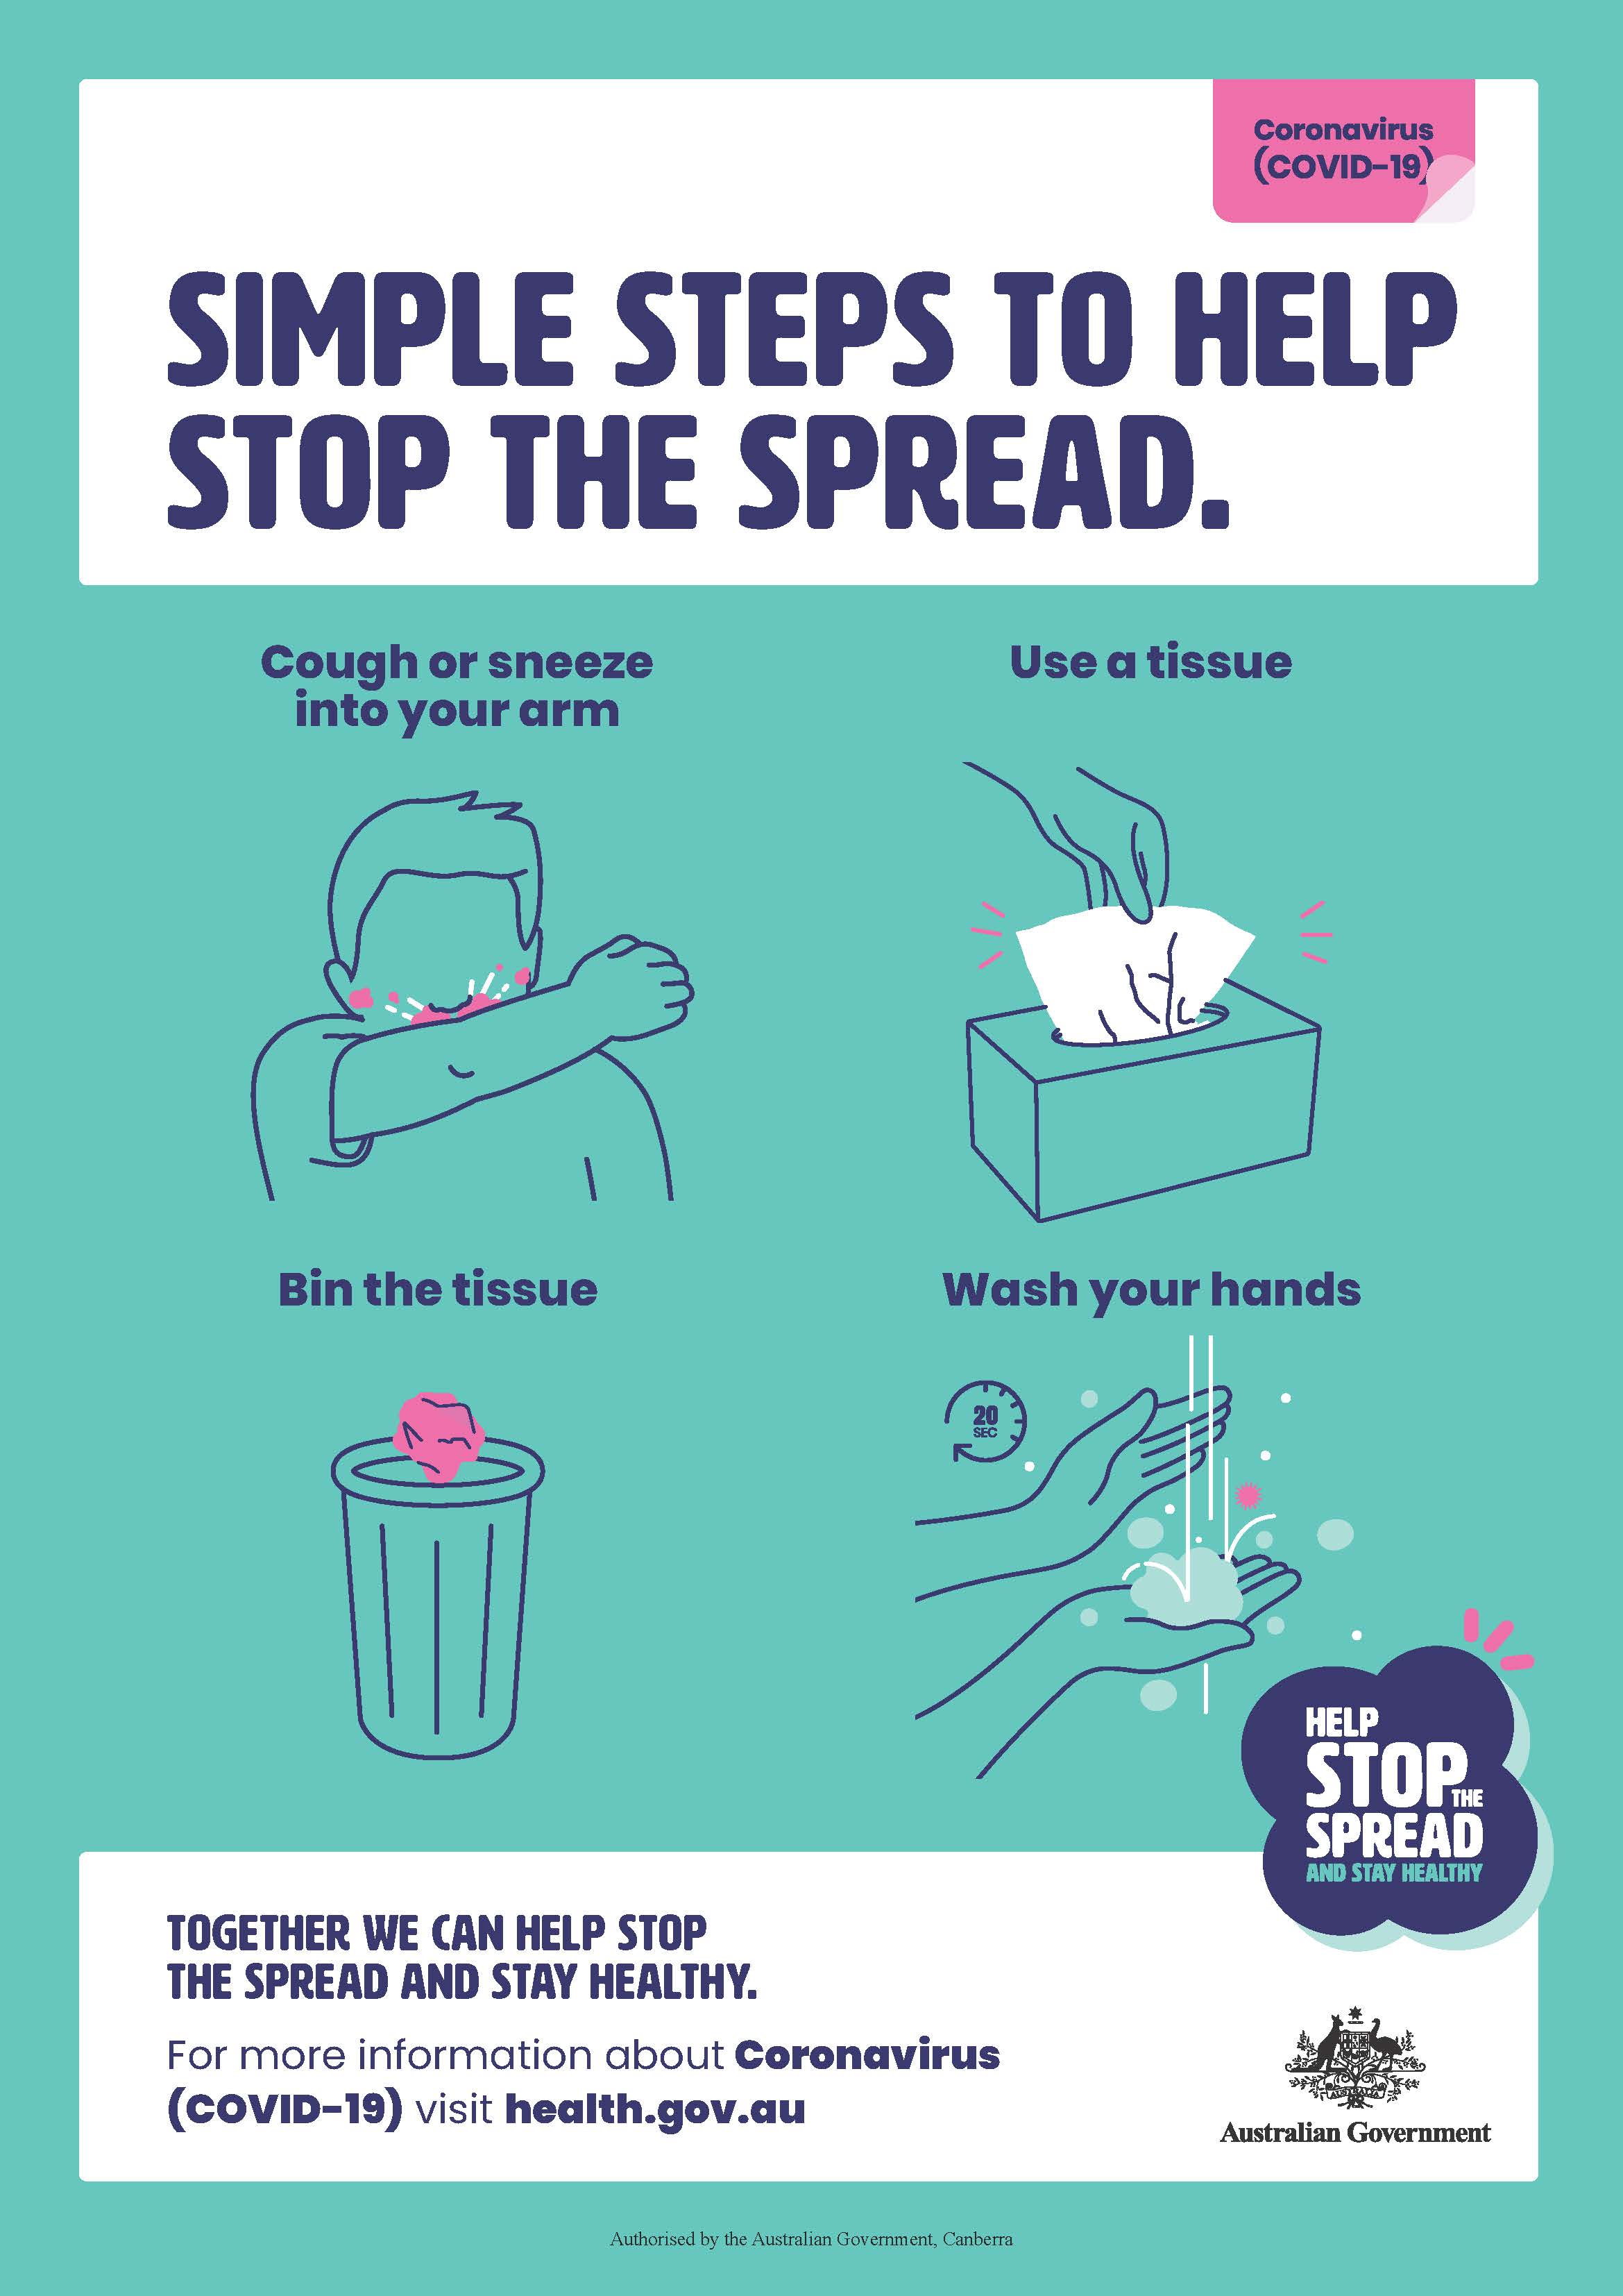 A poster of graphics showing four simple steps people can take to help minimise the spread of coronavirus.